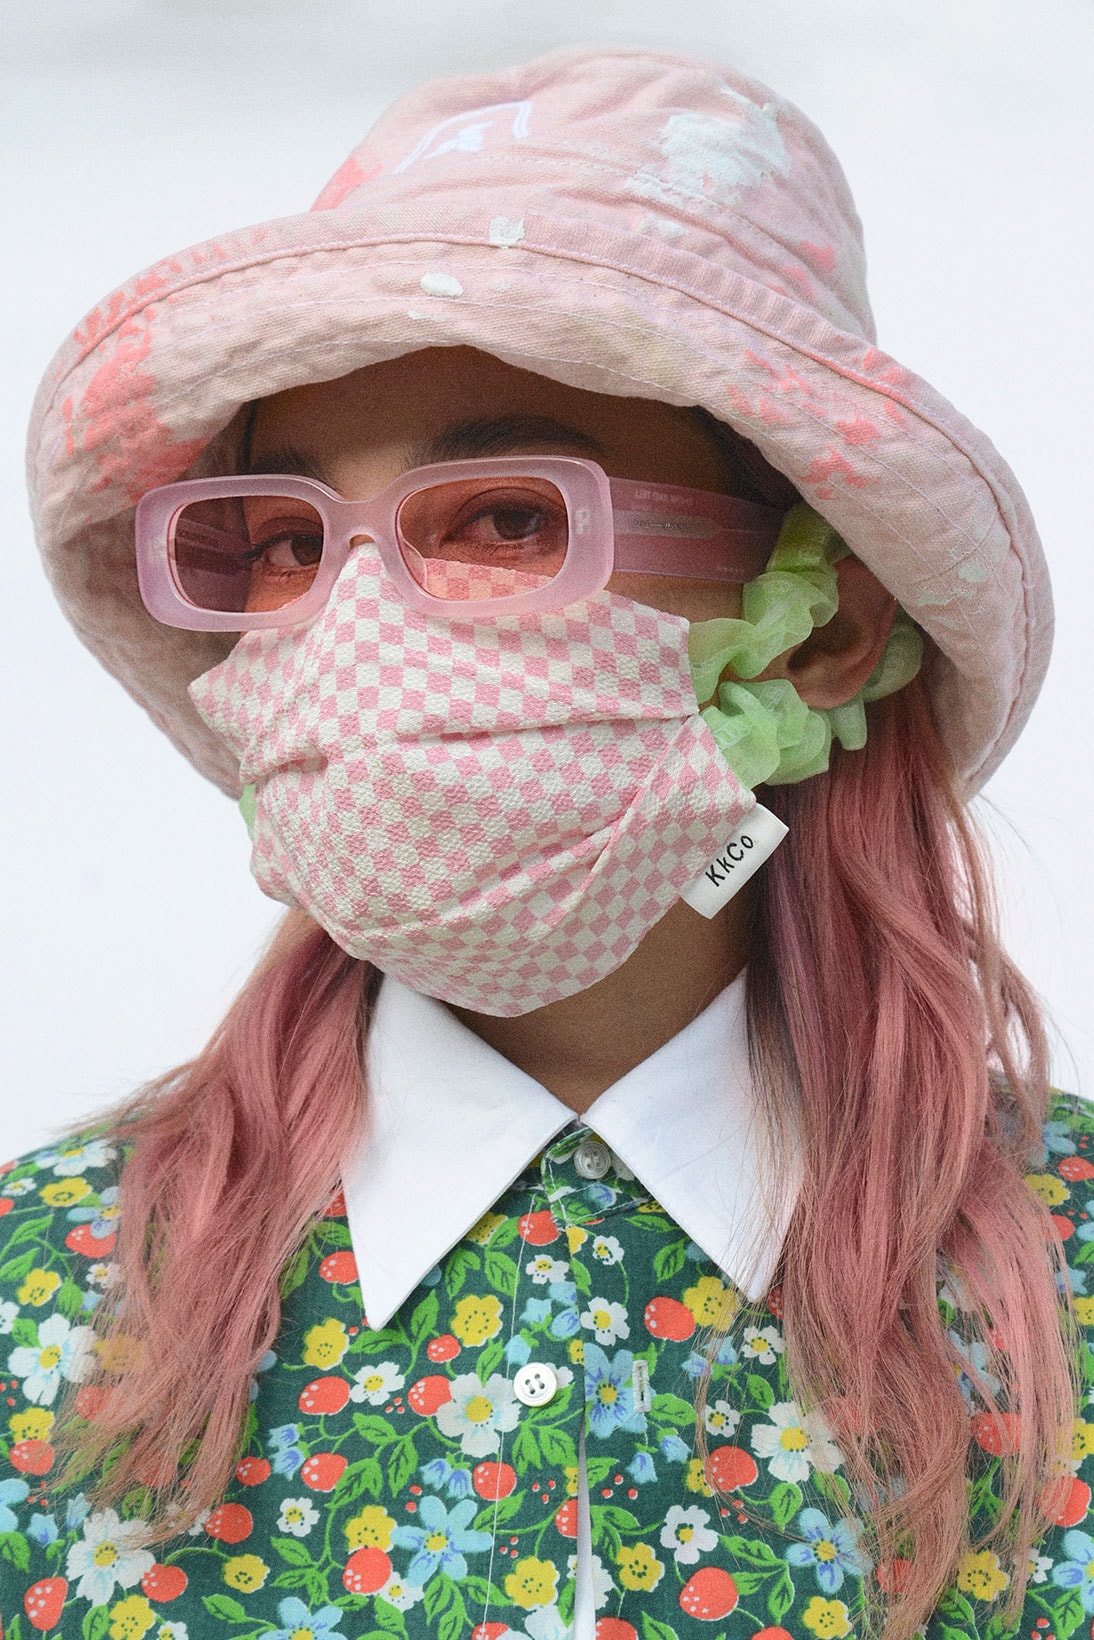 sosupersam bonnie clyde collaboration crystal jade sunglasses shades bucket hat face mask